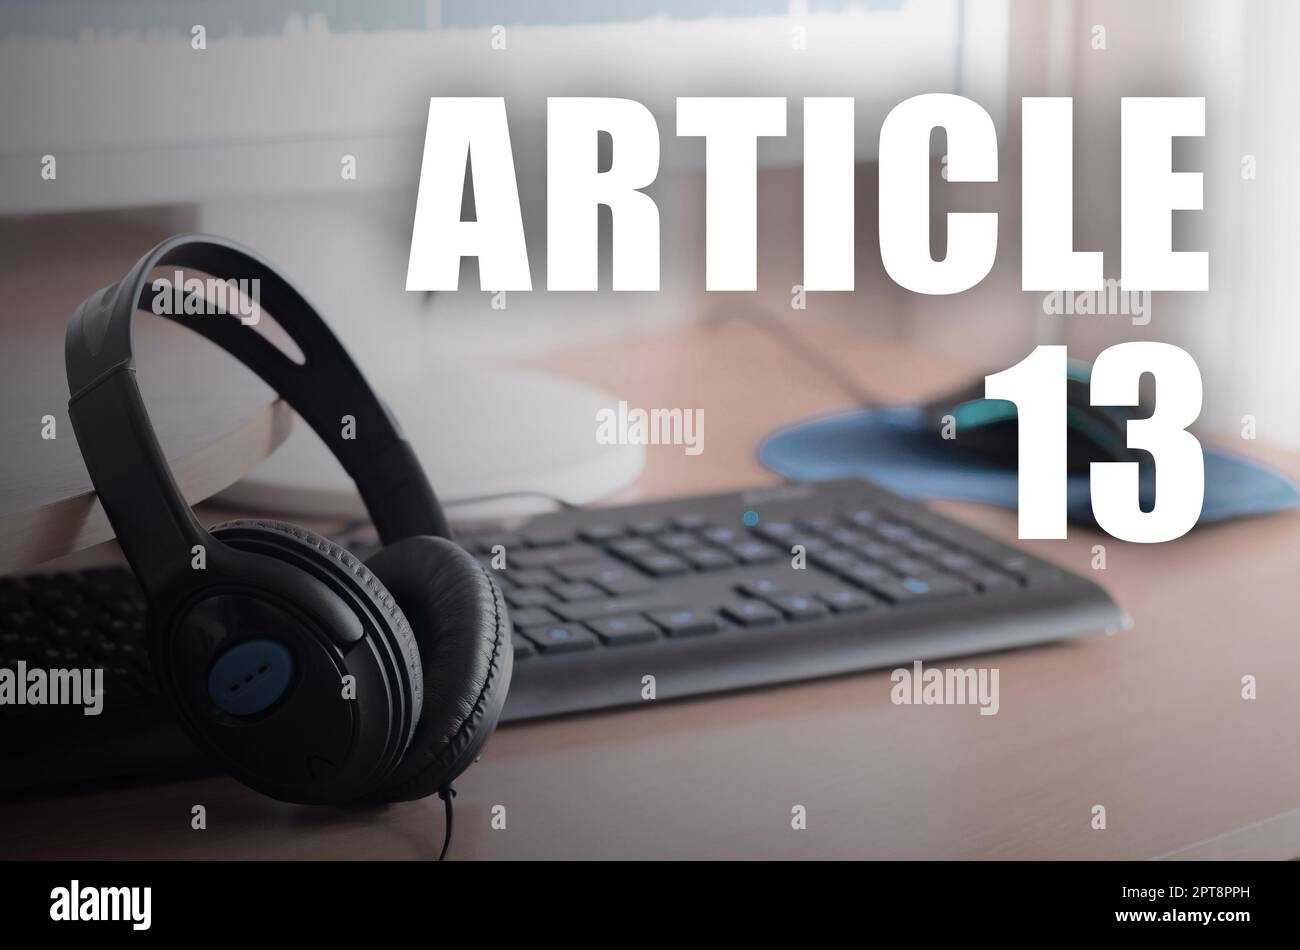 Article 13 inscription and headphones on the wooden desktop. European copyright directive including article 13 is approved by european parliament Stock Photo